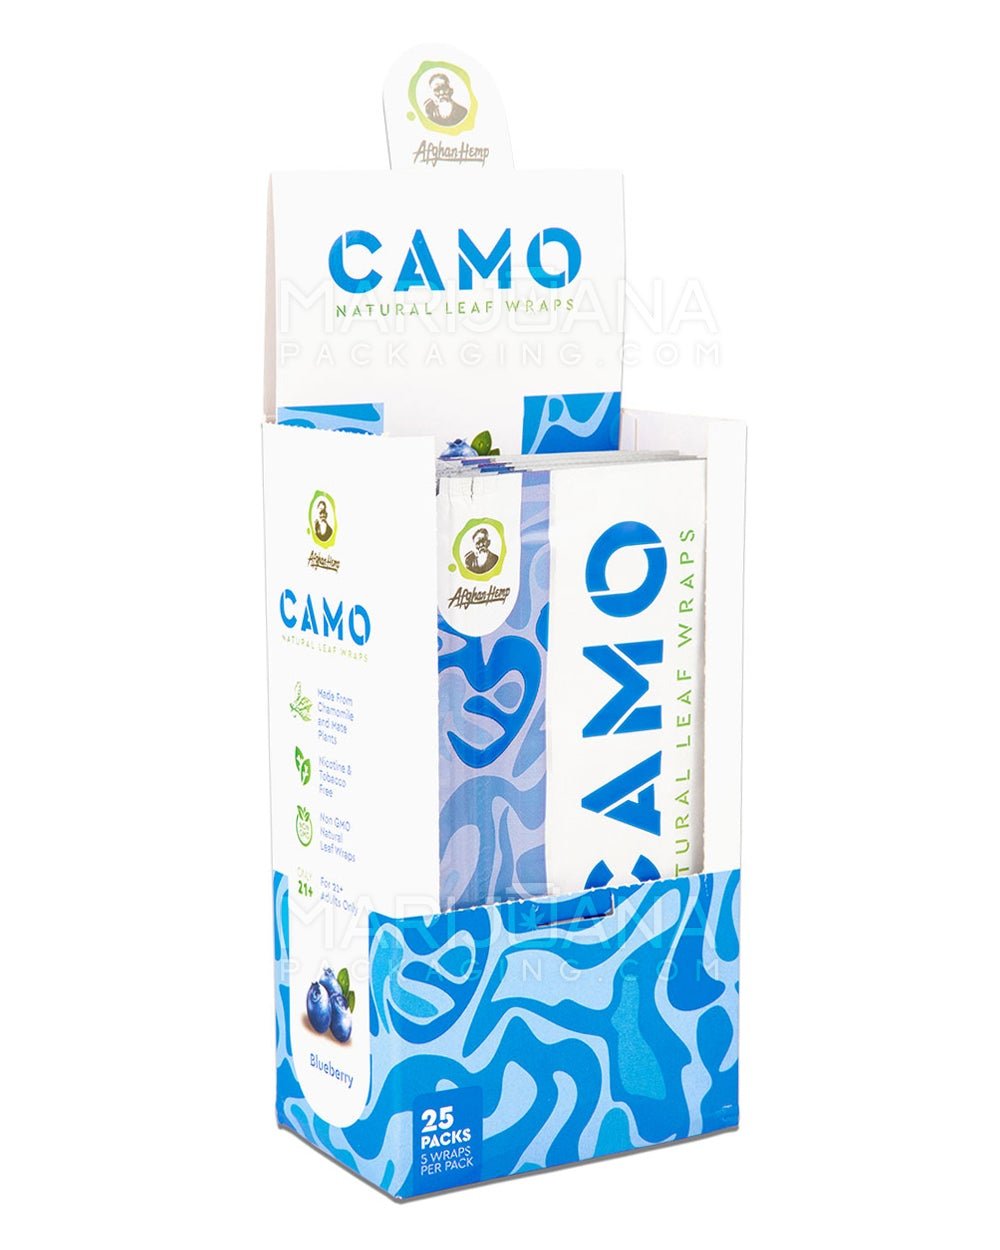 CAMO | 'Retail Display' Natural Leaf Resealable Pouch Blunt Wraps | 109mm - Blueberry - 25 Count - 2